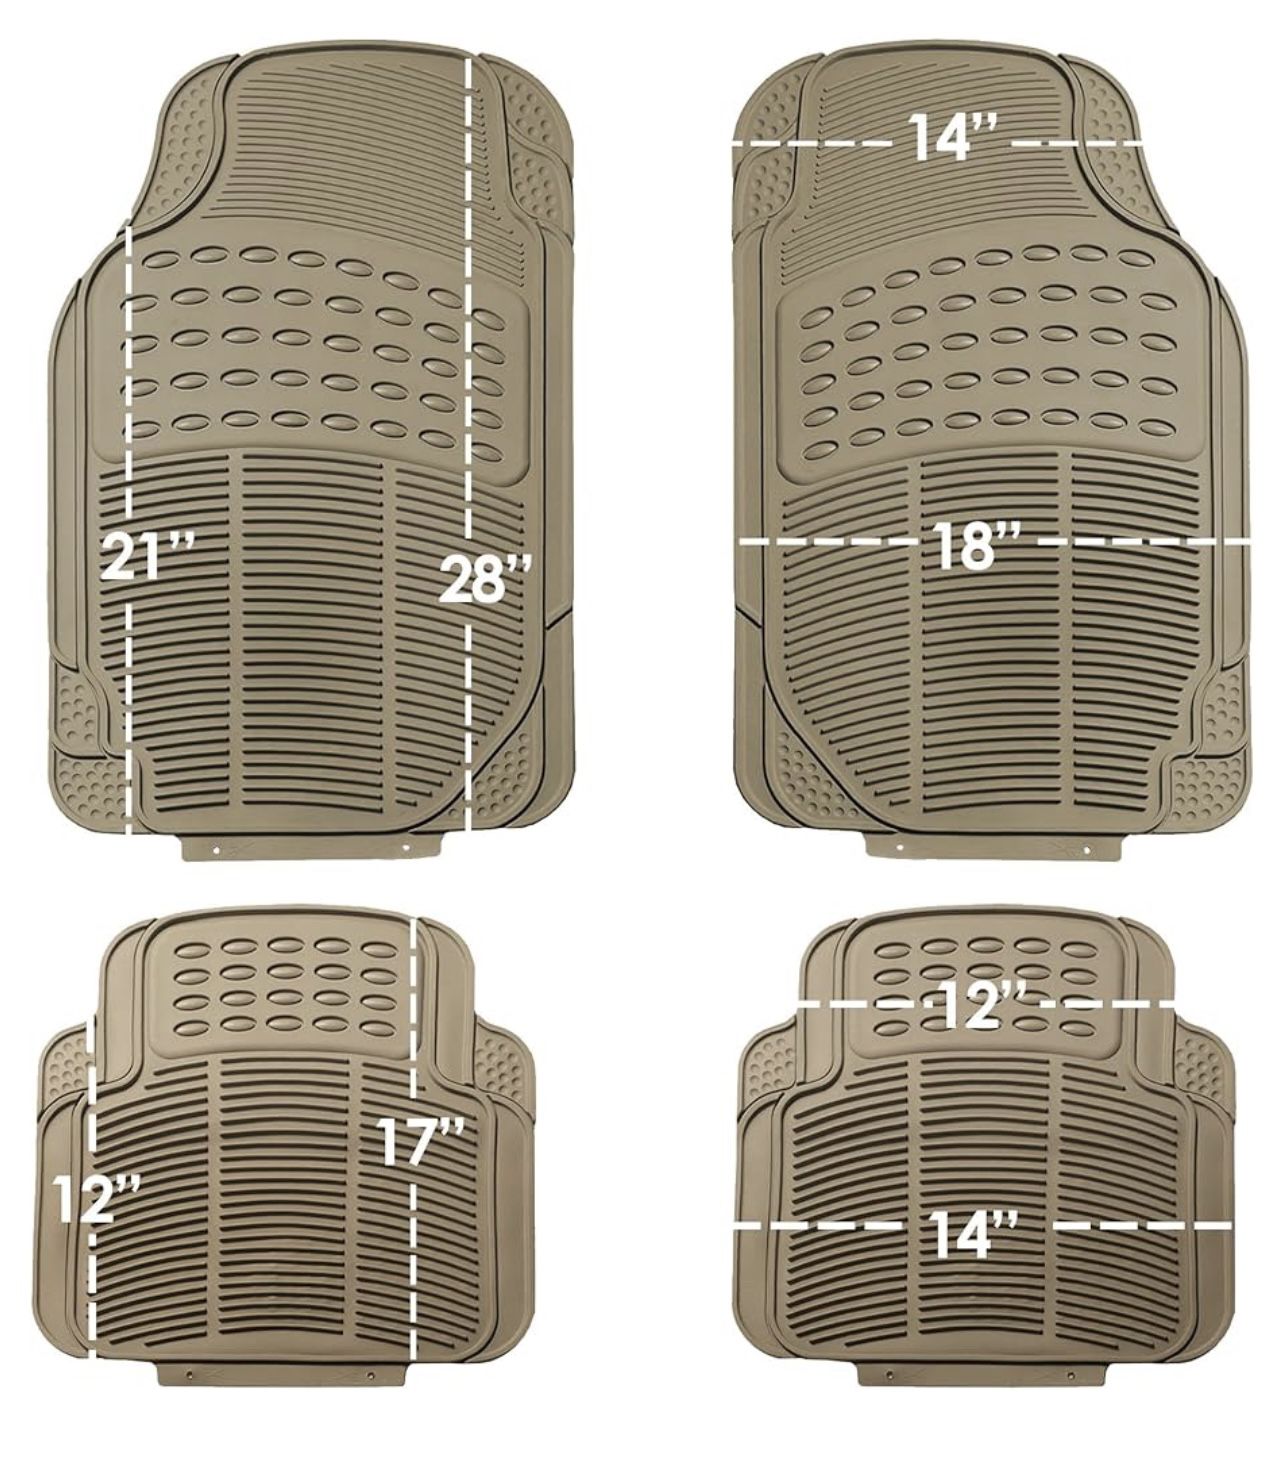 🆕 Automotive HeavyDuty Rubber Floor Mats for Cars, Universal Fit Full Set